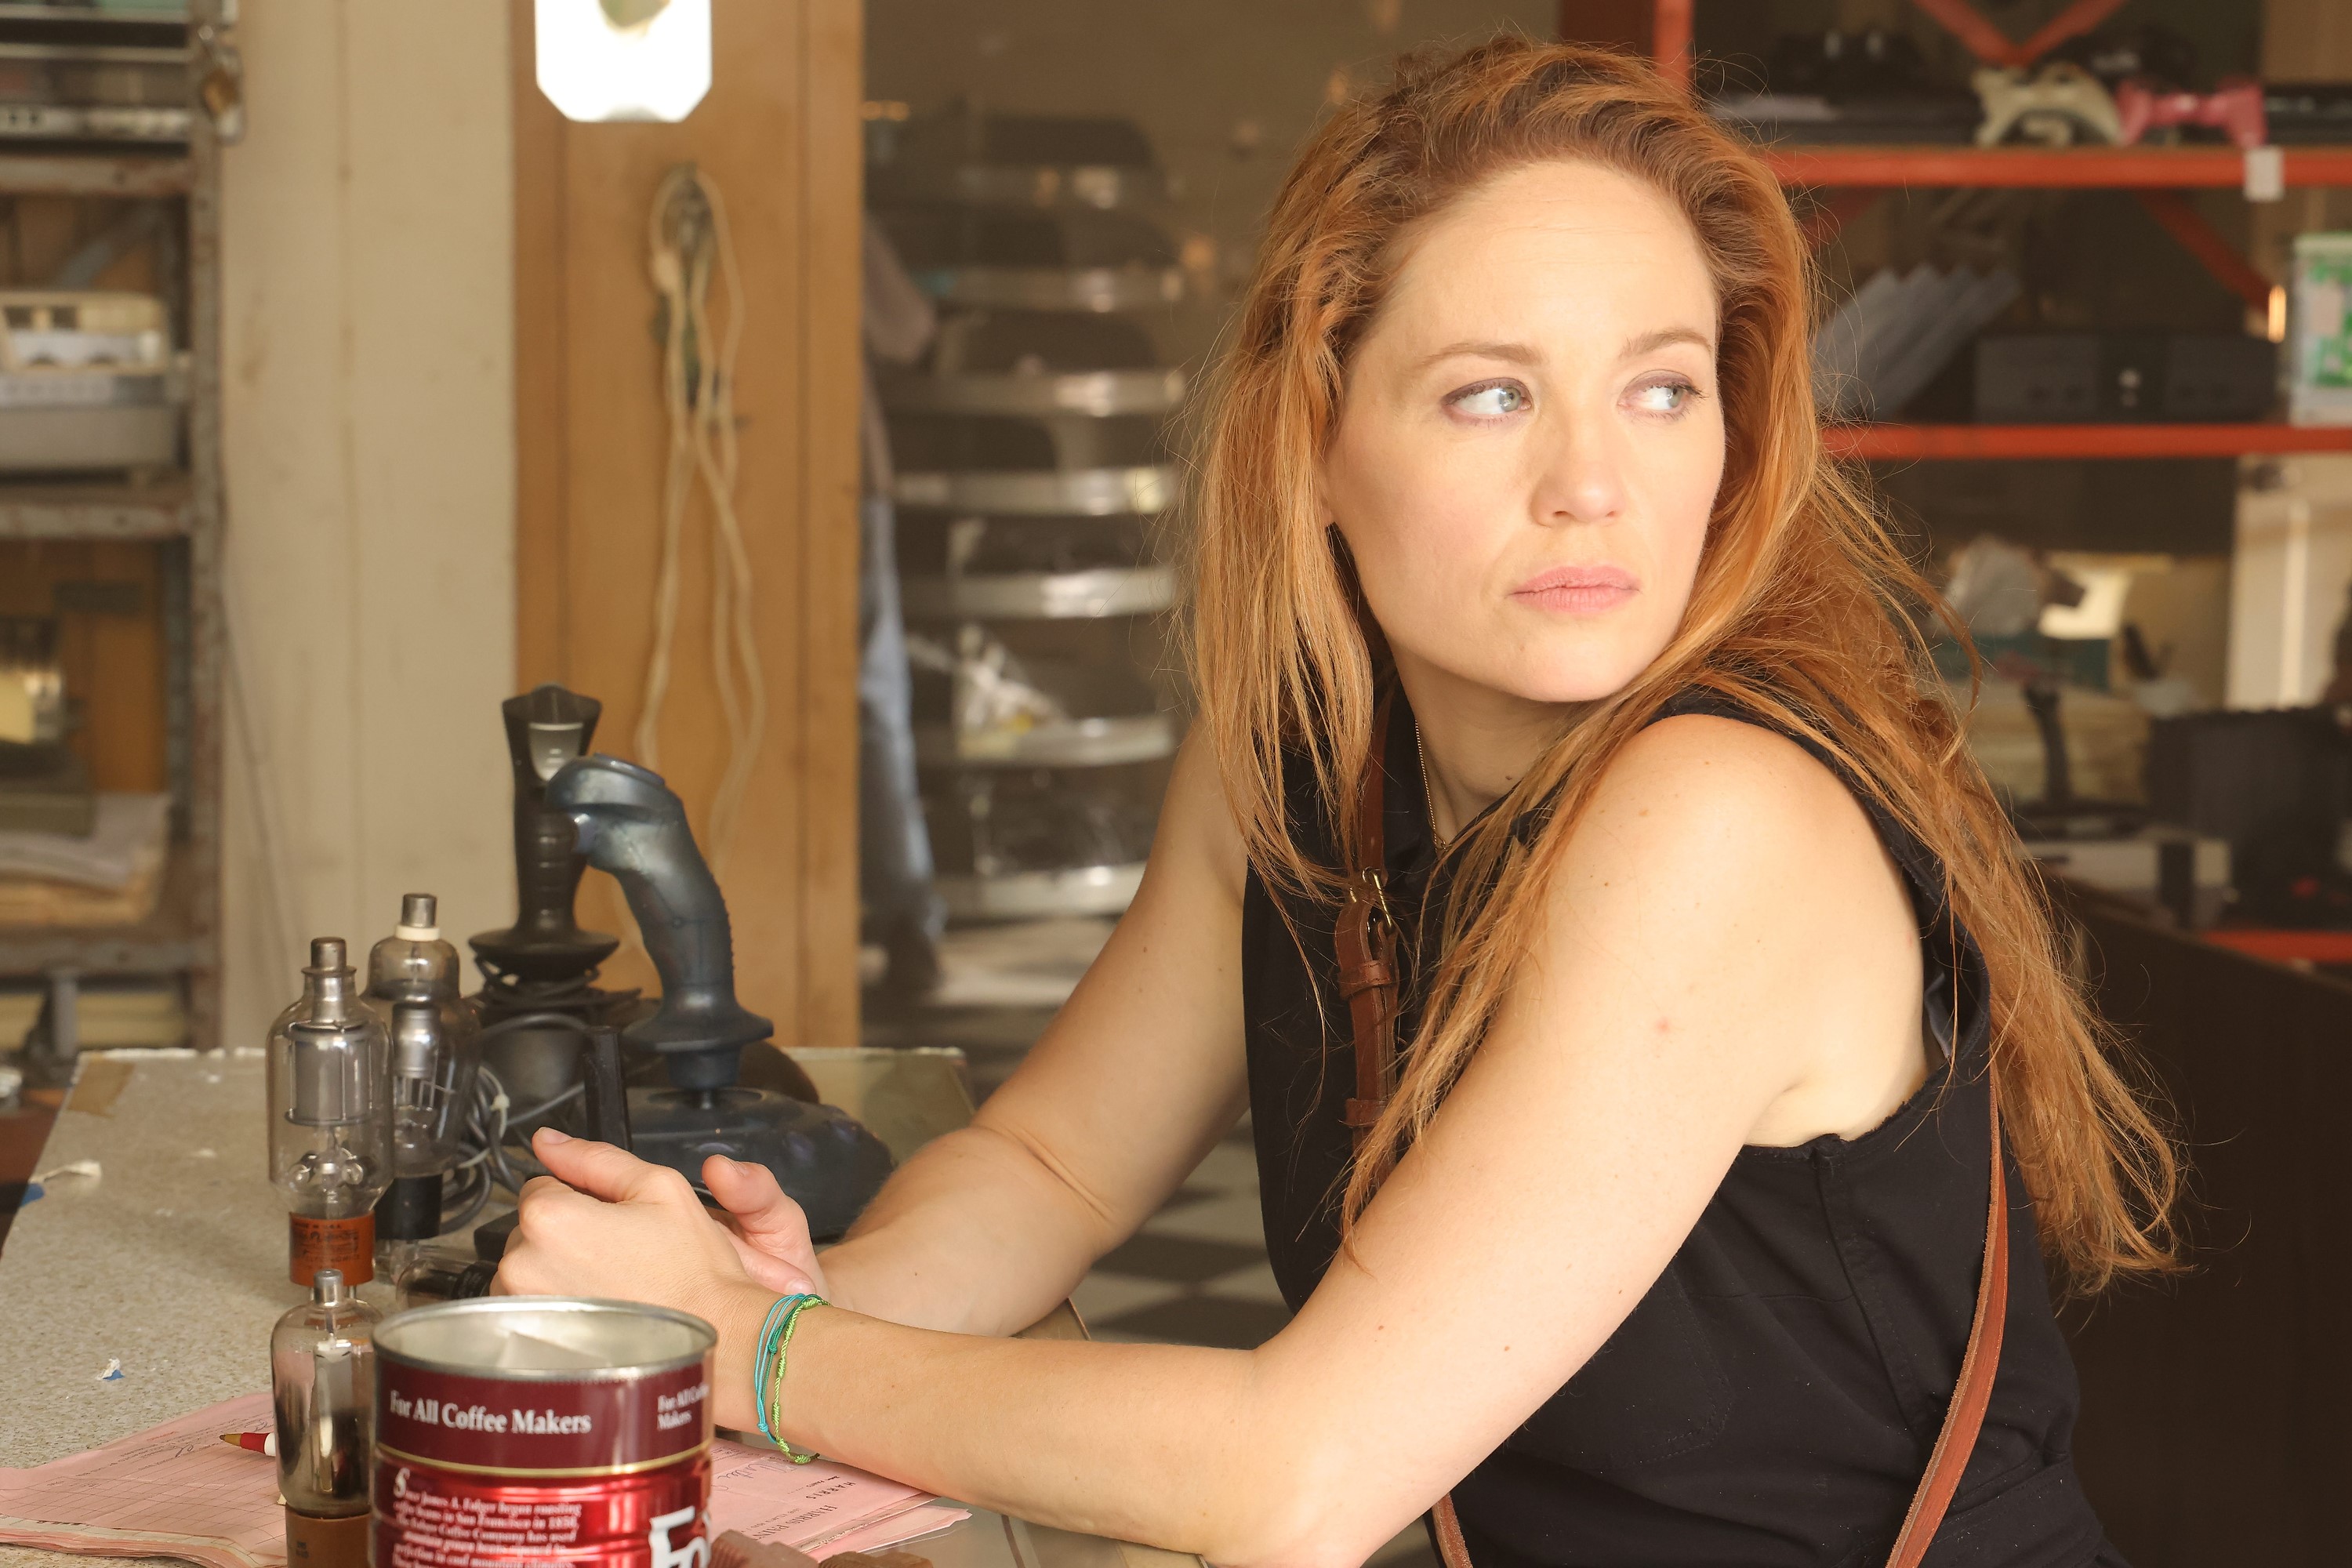 Erika Christensen, in character as Angie Polaski in 'Will Trent' on ABC, wears a black tank top.